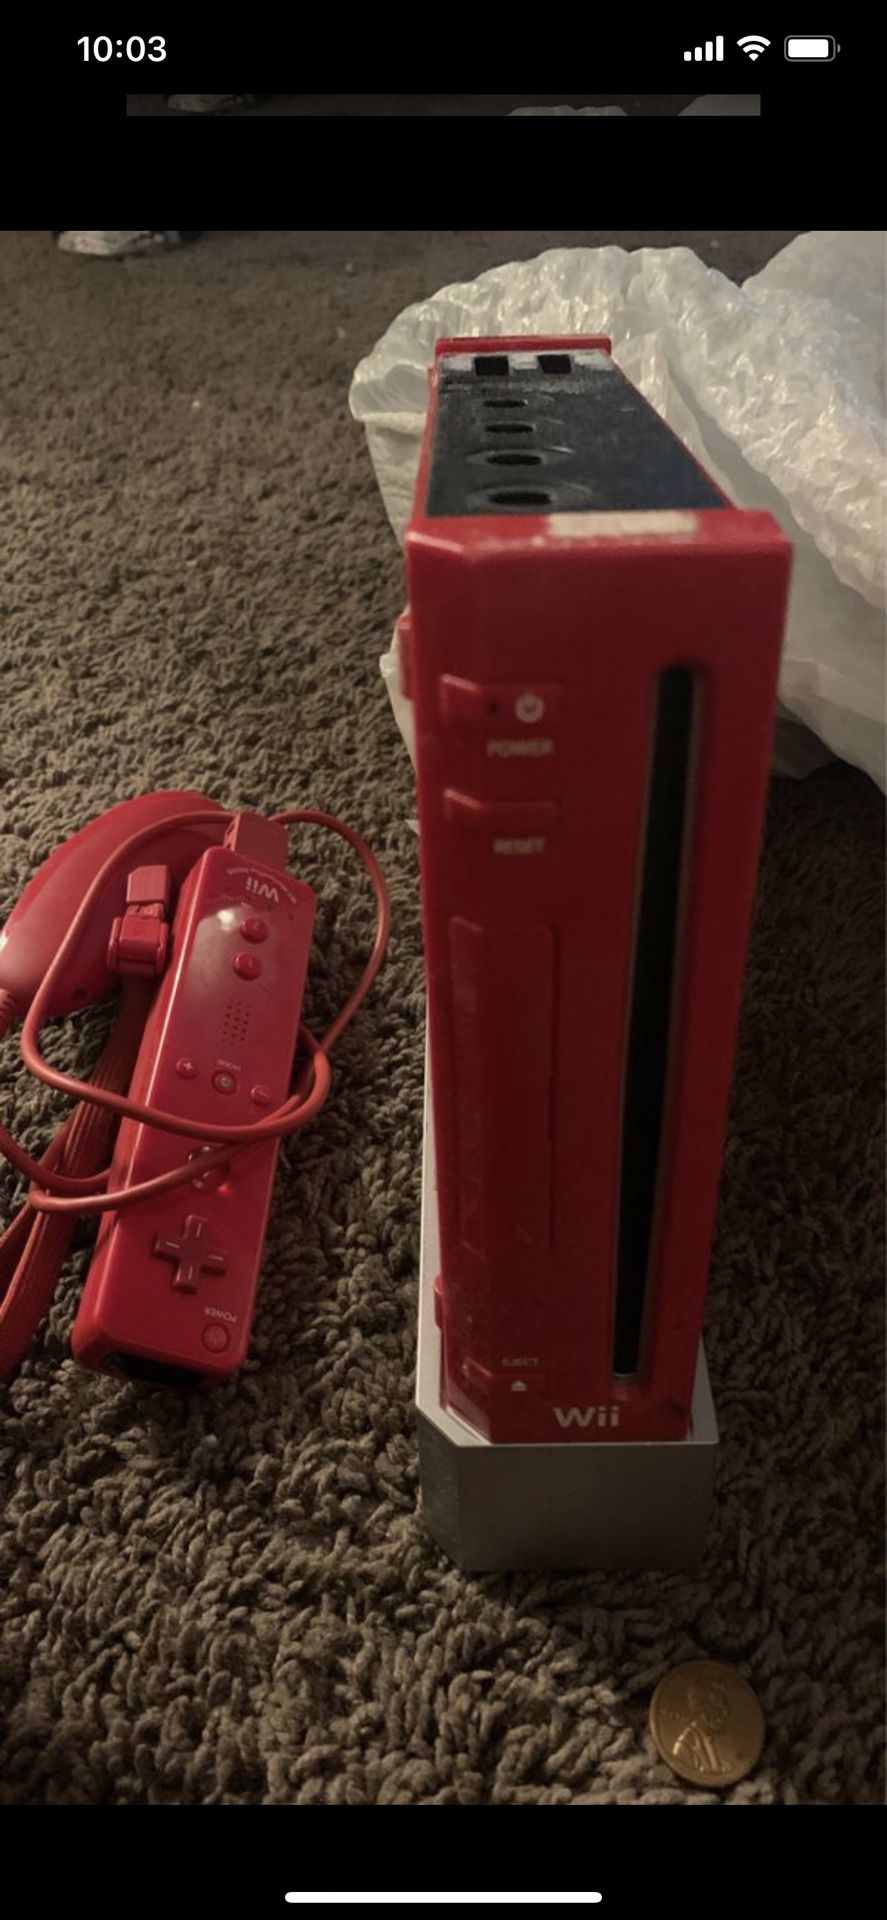 Modded Wii 4000 plus games .1 controller 1 nunchuck $55